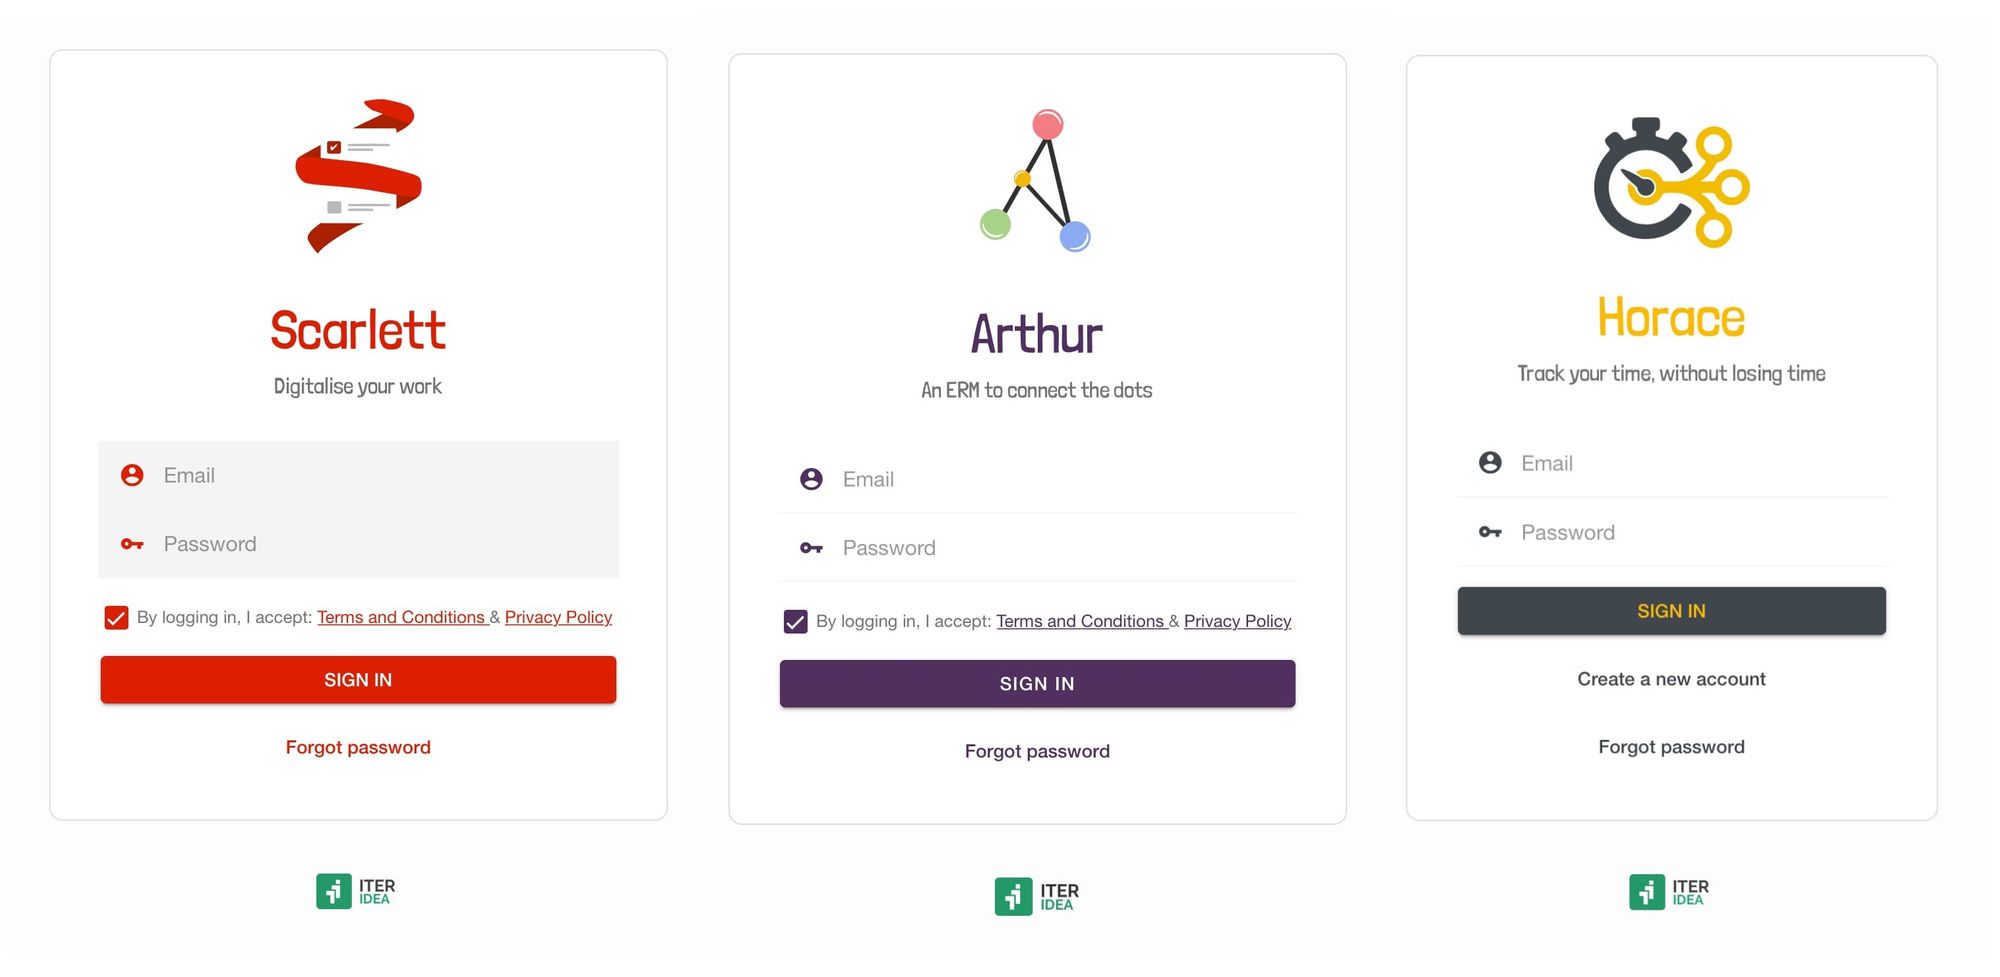 The login screen across the different IDEA services